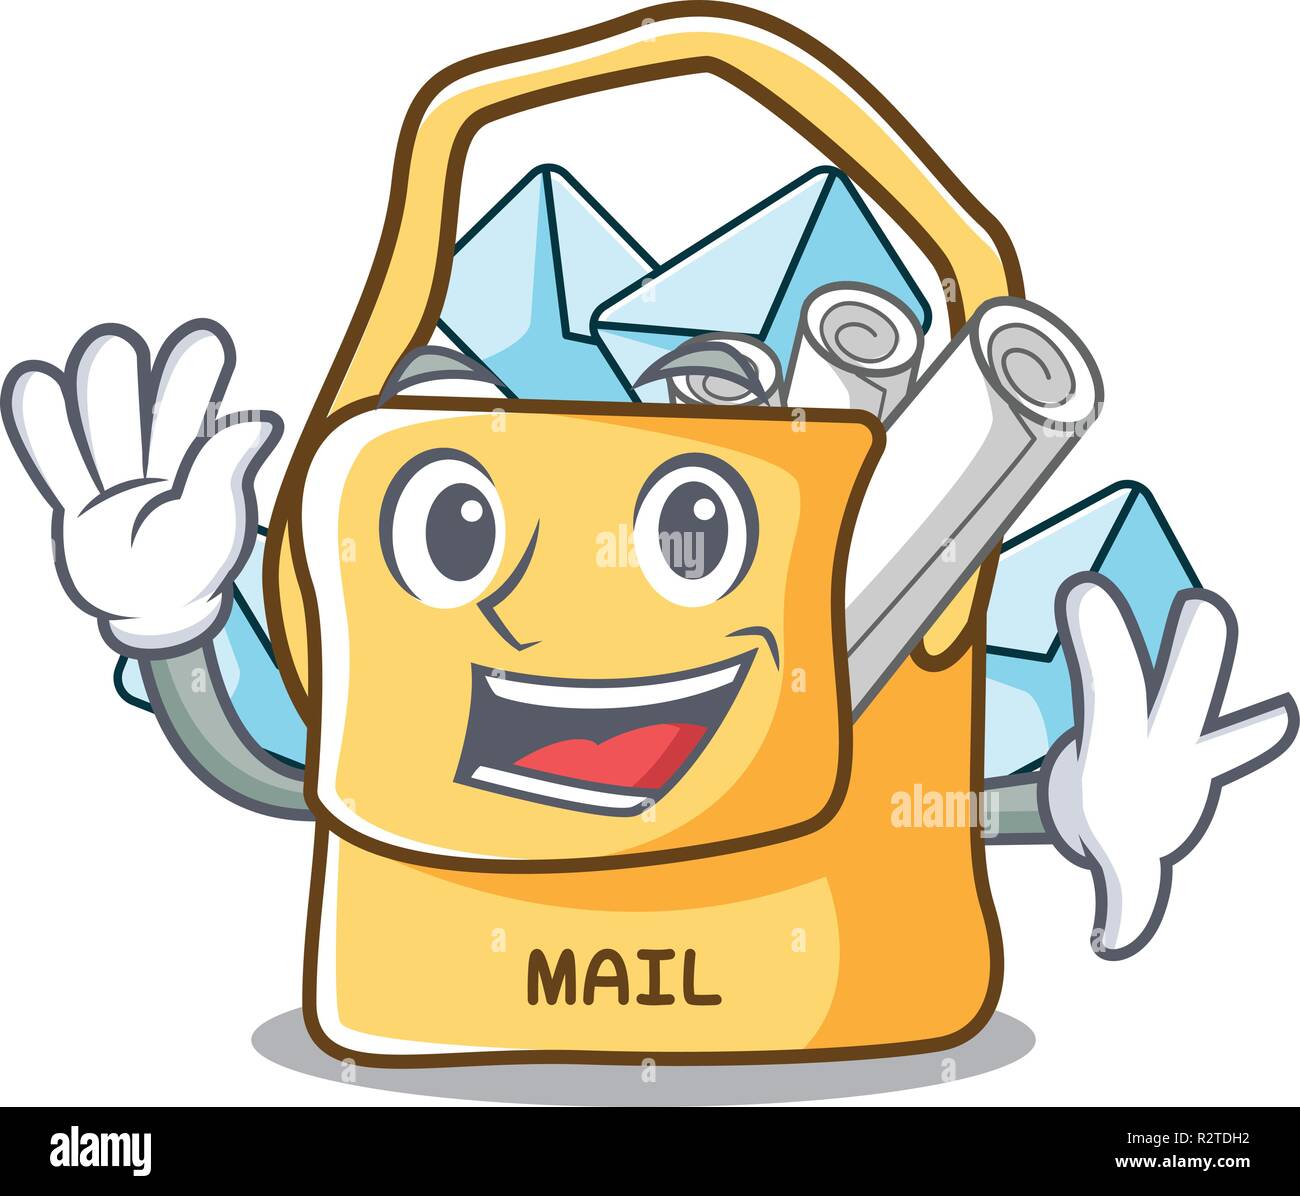 Waving the bag with shape mail cartoon Stock Vector